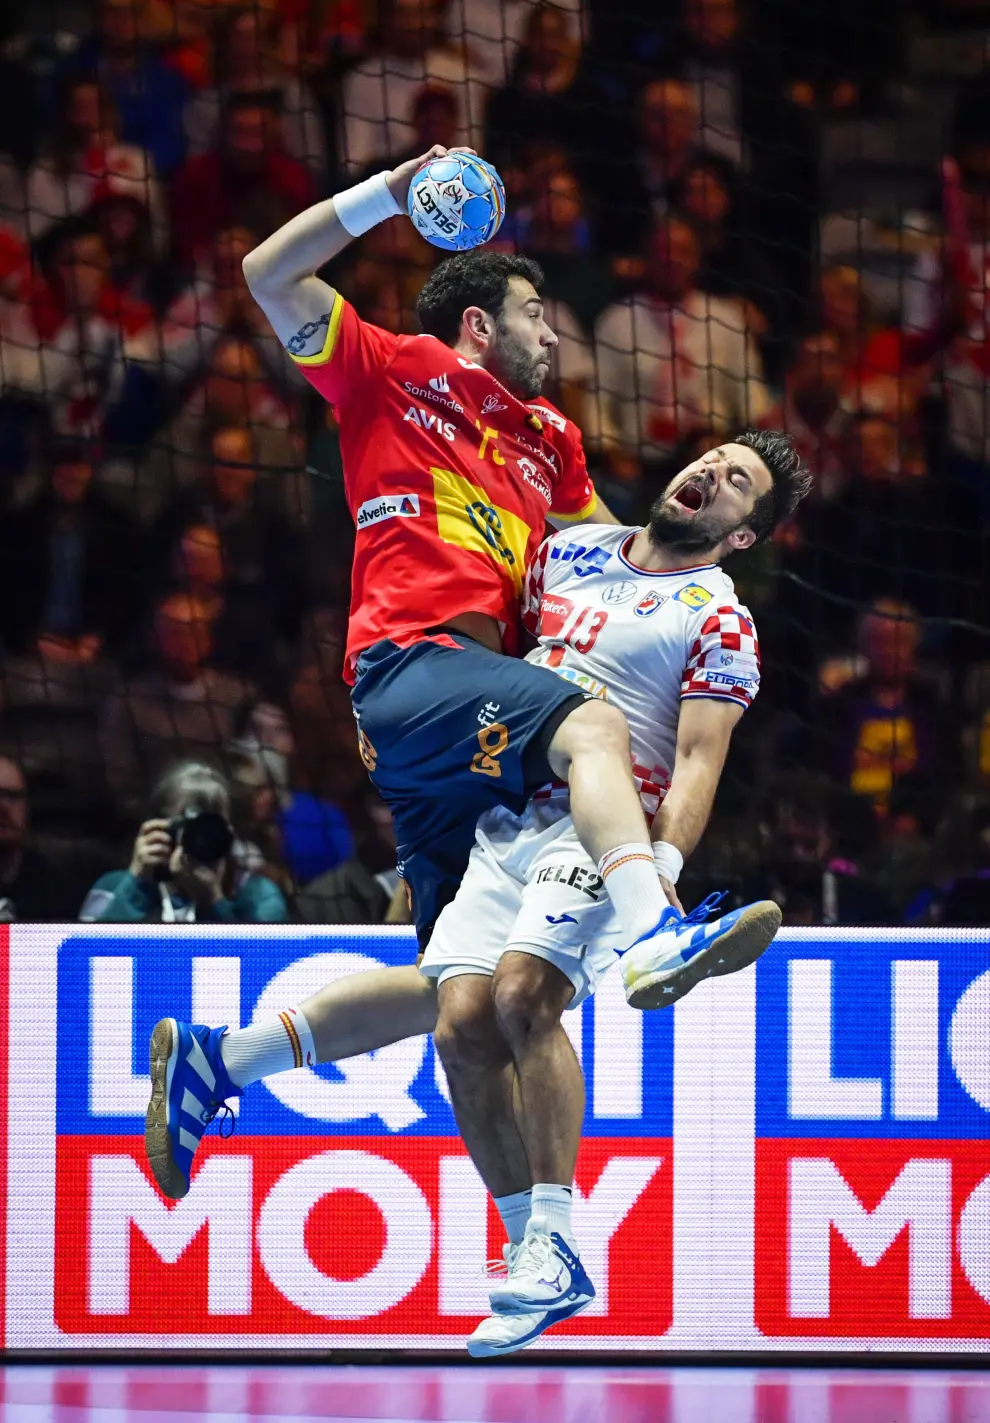 2020 European Handball Championship - Final - Spain v Croatia - Stockholm, Sweden - January 26, 2020 -Croatia's David Mandic in action. Anders Wiklund/TT News Agency/via REUTERS ATTENTION EDITORS - THIS IMAGE WAS PROVIDED BY A THIRD PARTY. SWEDEN OUT. NO COMMERCIAL OR EDITORIAL SALES IN SWEDEN. [[[REUTERS VOCENTO]]]